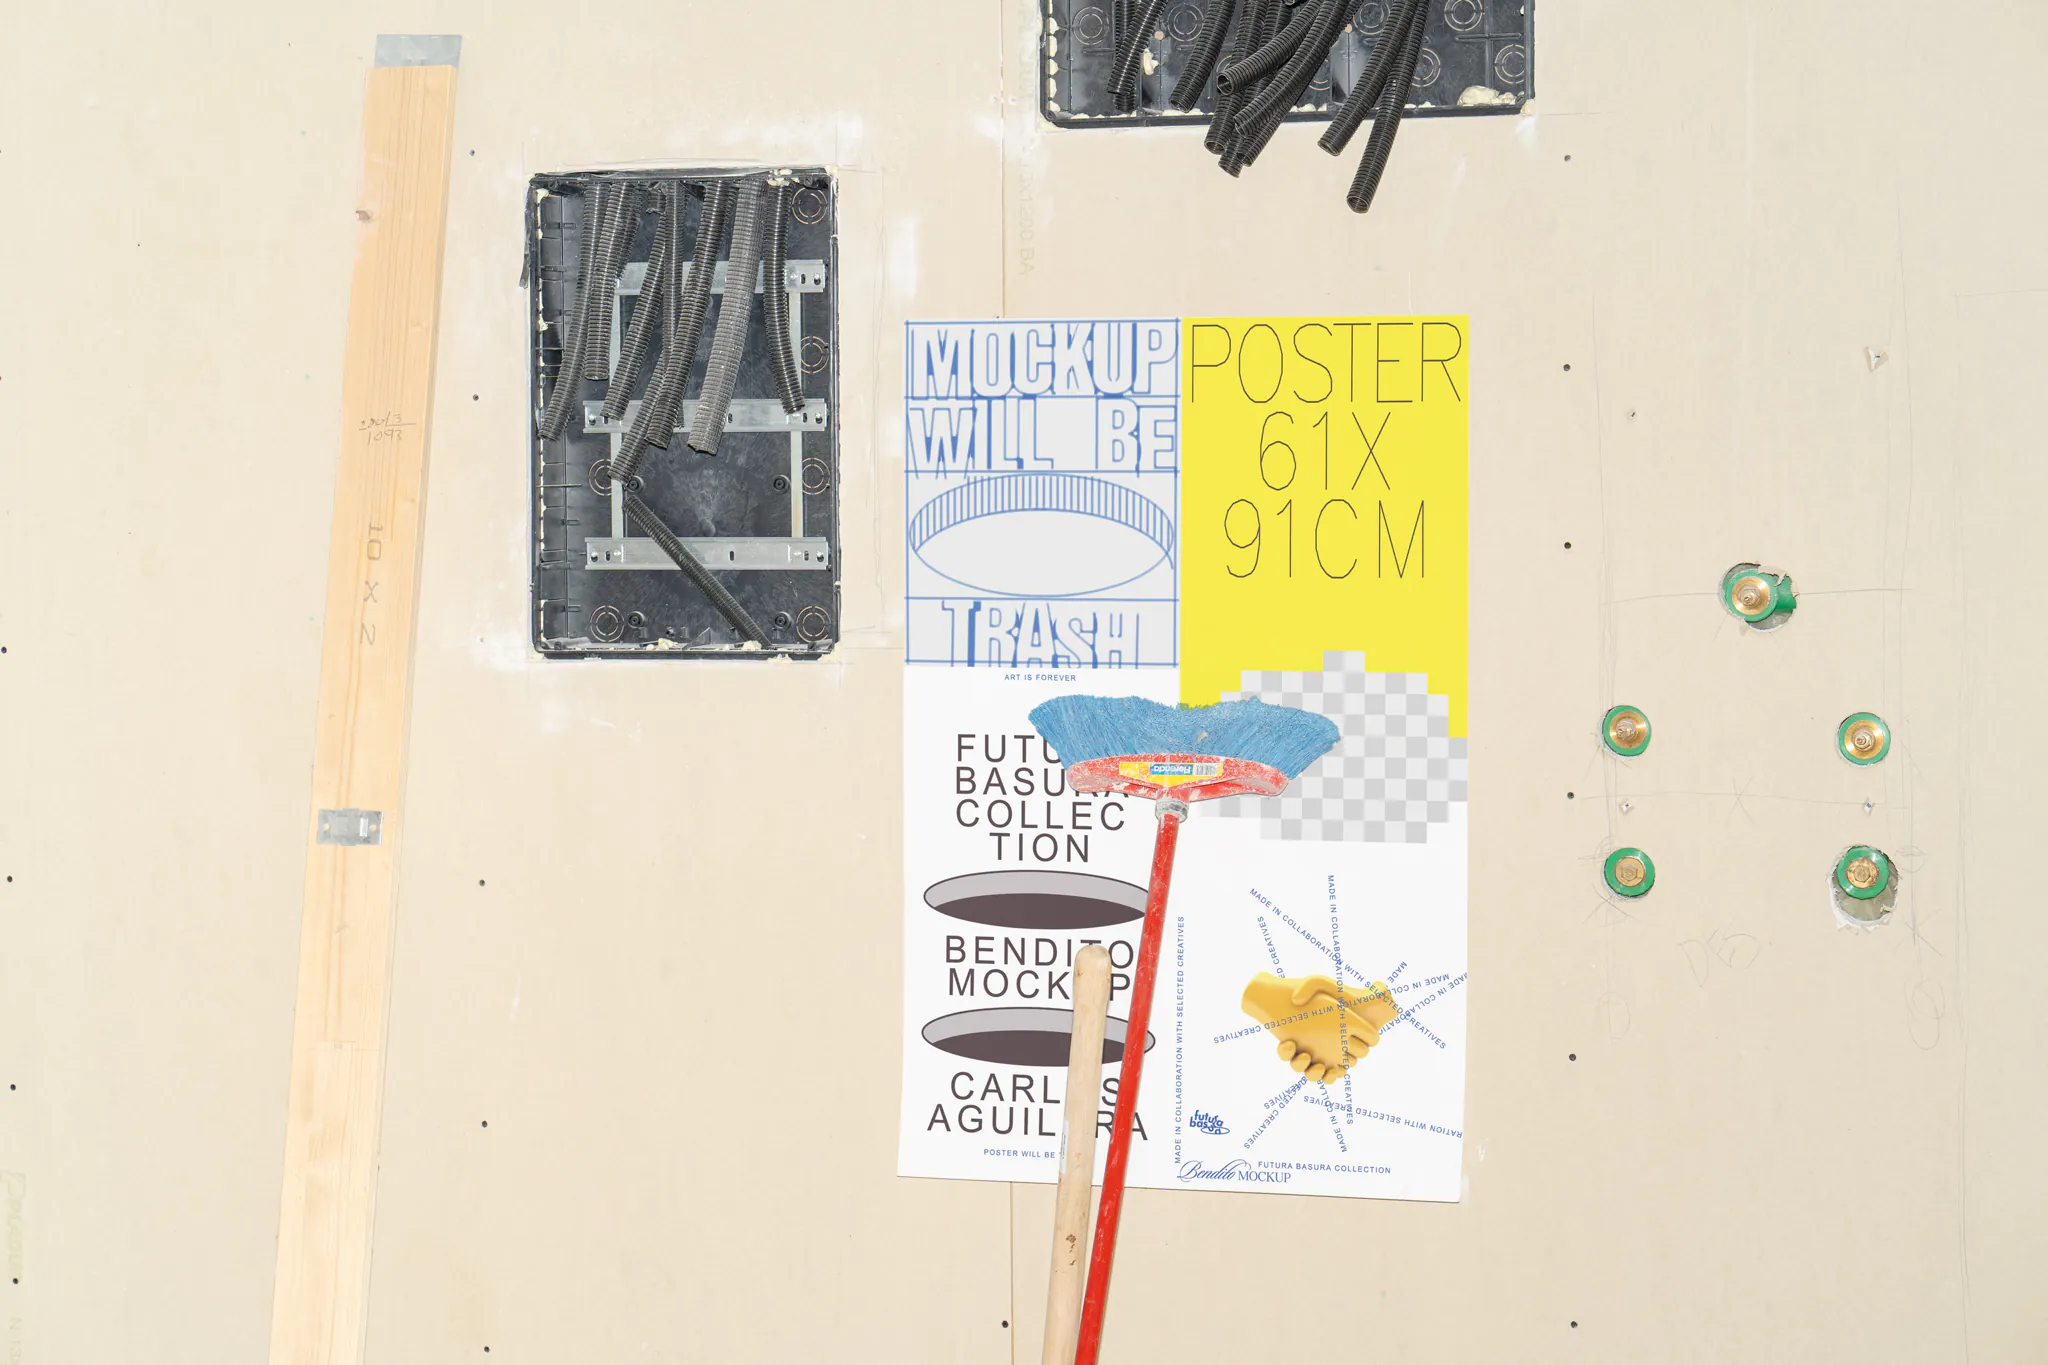 Poster mockup on a building construction wall with a broom in front and a piece of wood next to it